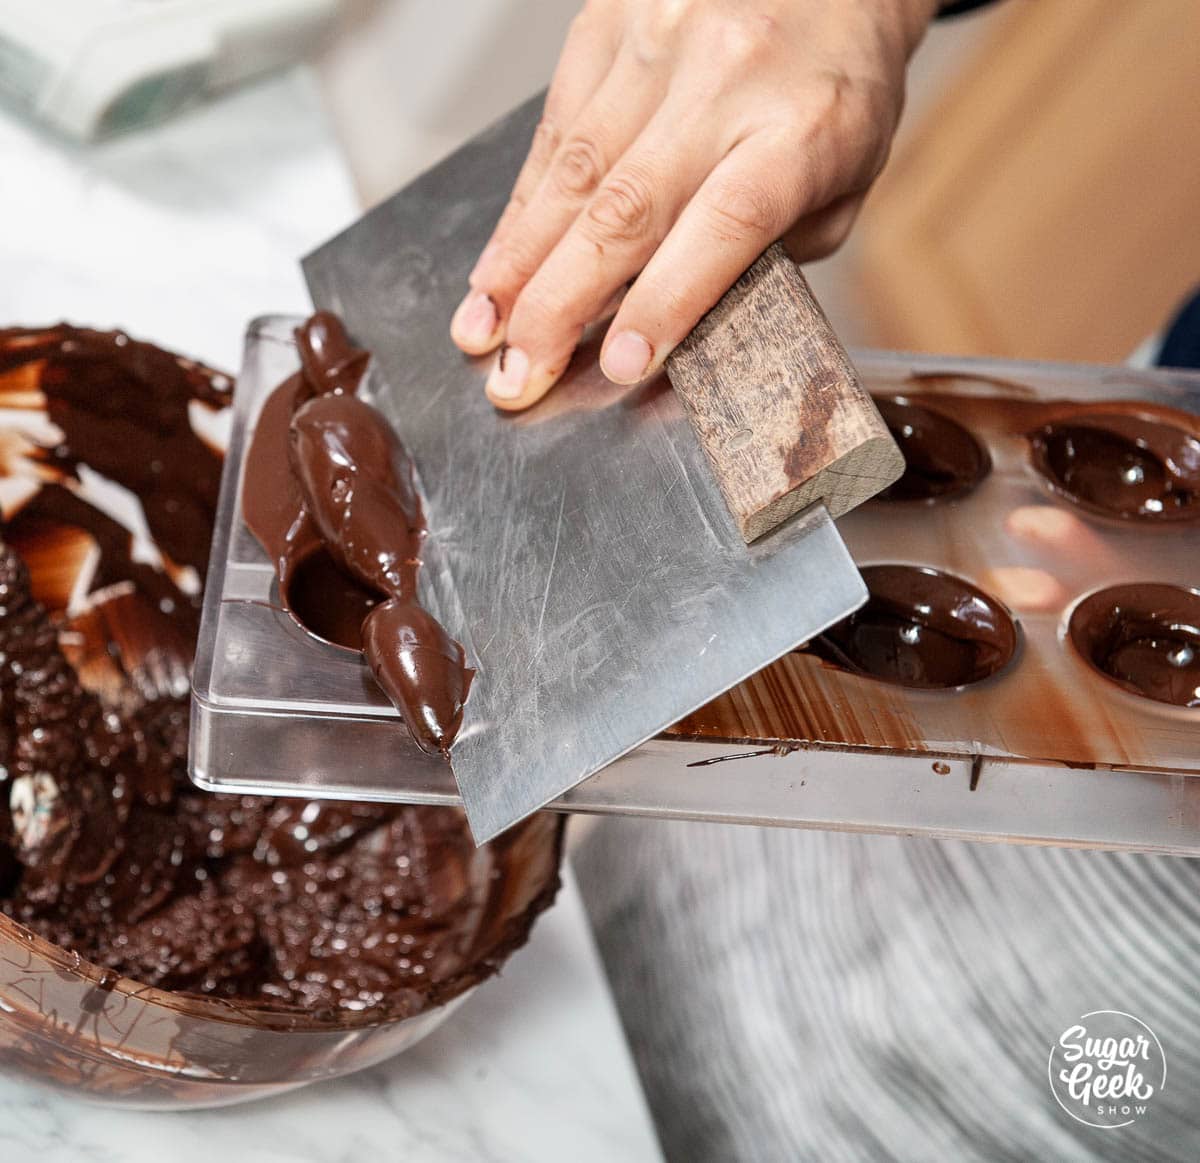 scraping excess chocolate off the mold with a bench scraper